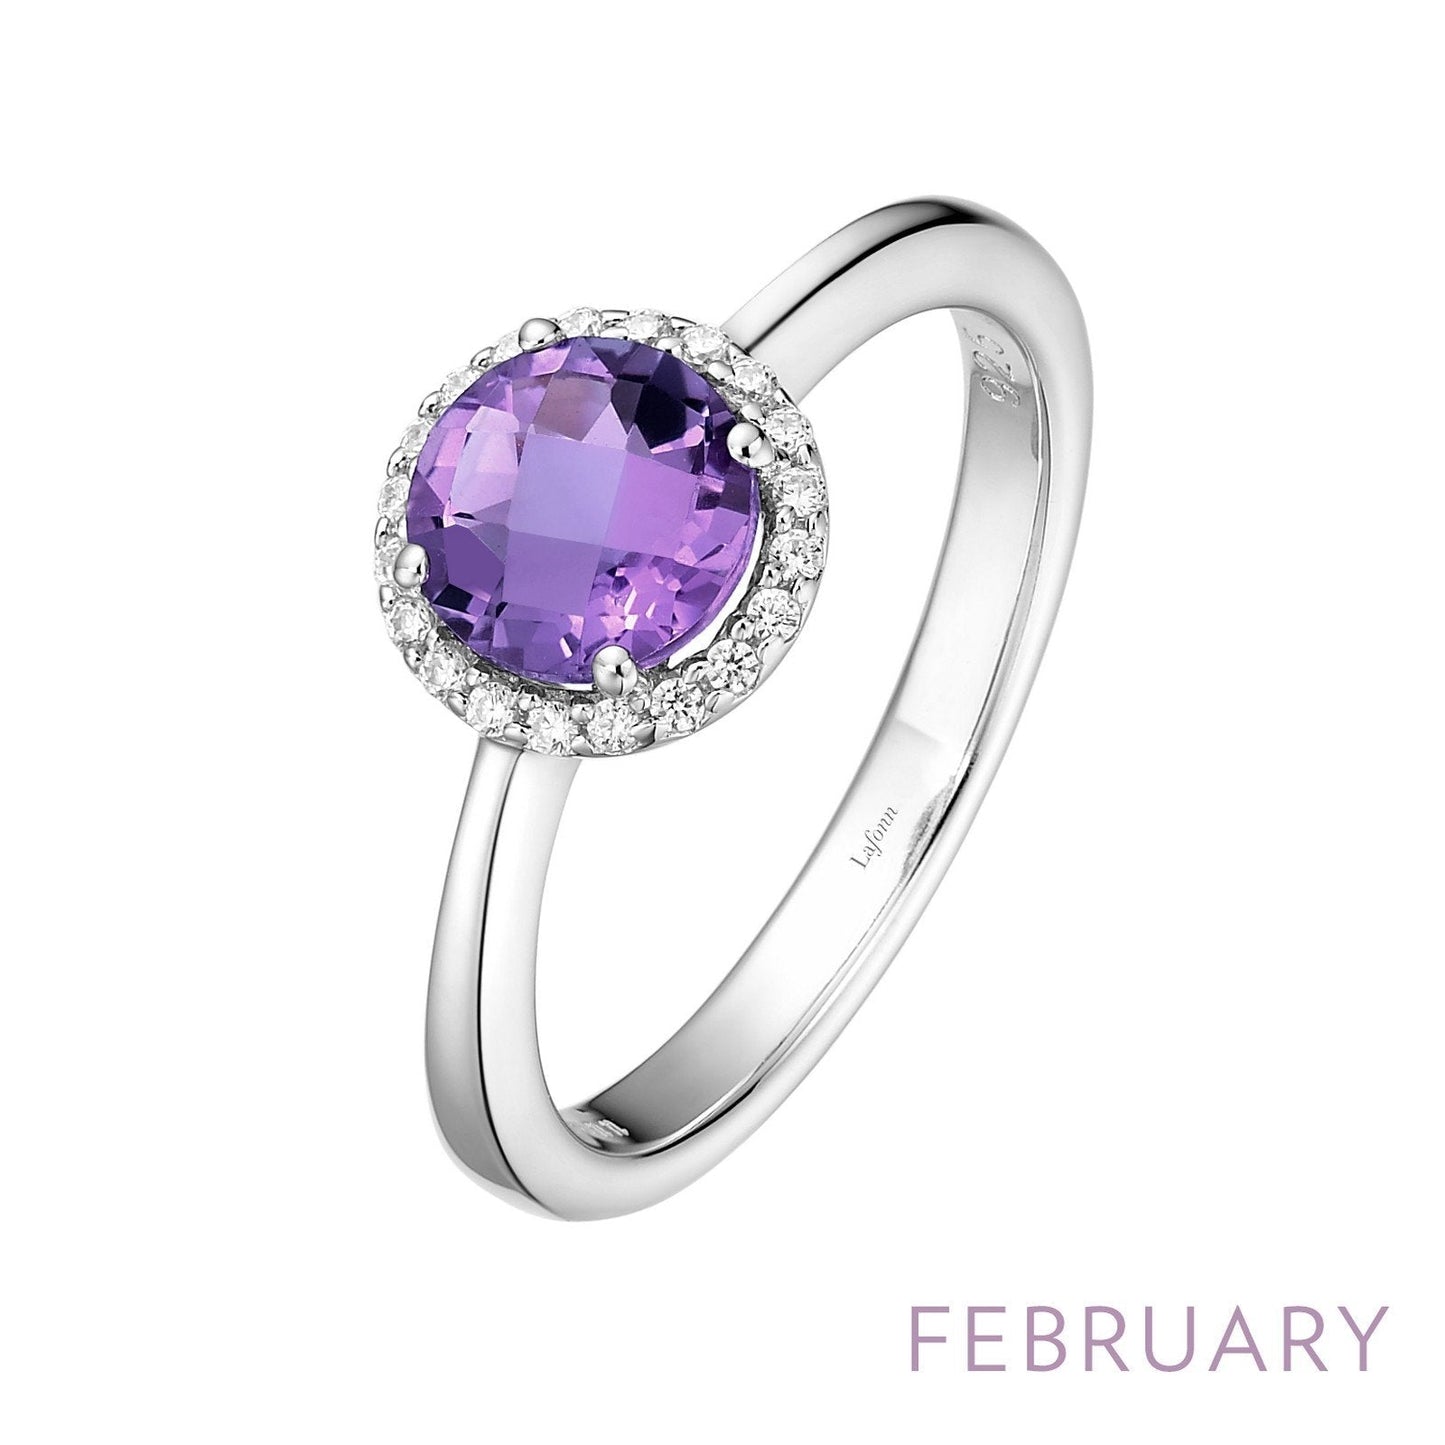 Lafonn February Birthstone Ring FEBRUARY RINGS Size 9 Platinum Appx CTW: 1.05 cts. Amethyst Appx 0.85 cts.  Lassaire simulated diamonds: 0.20 cts. CTS 